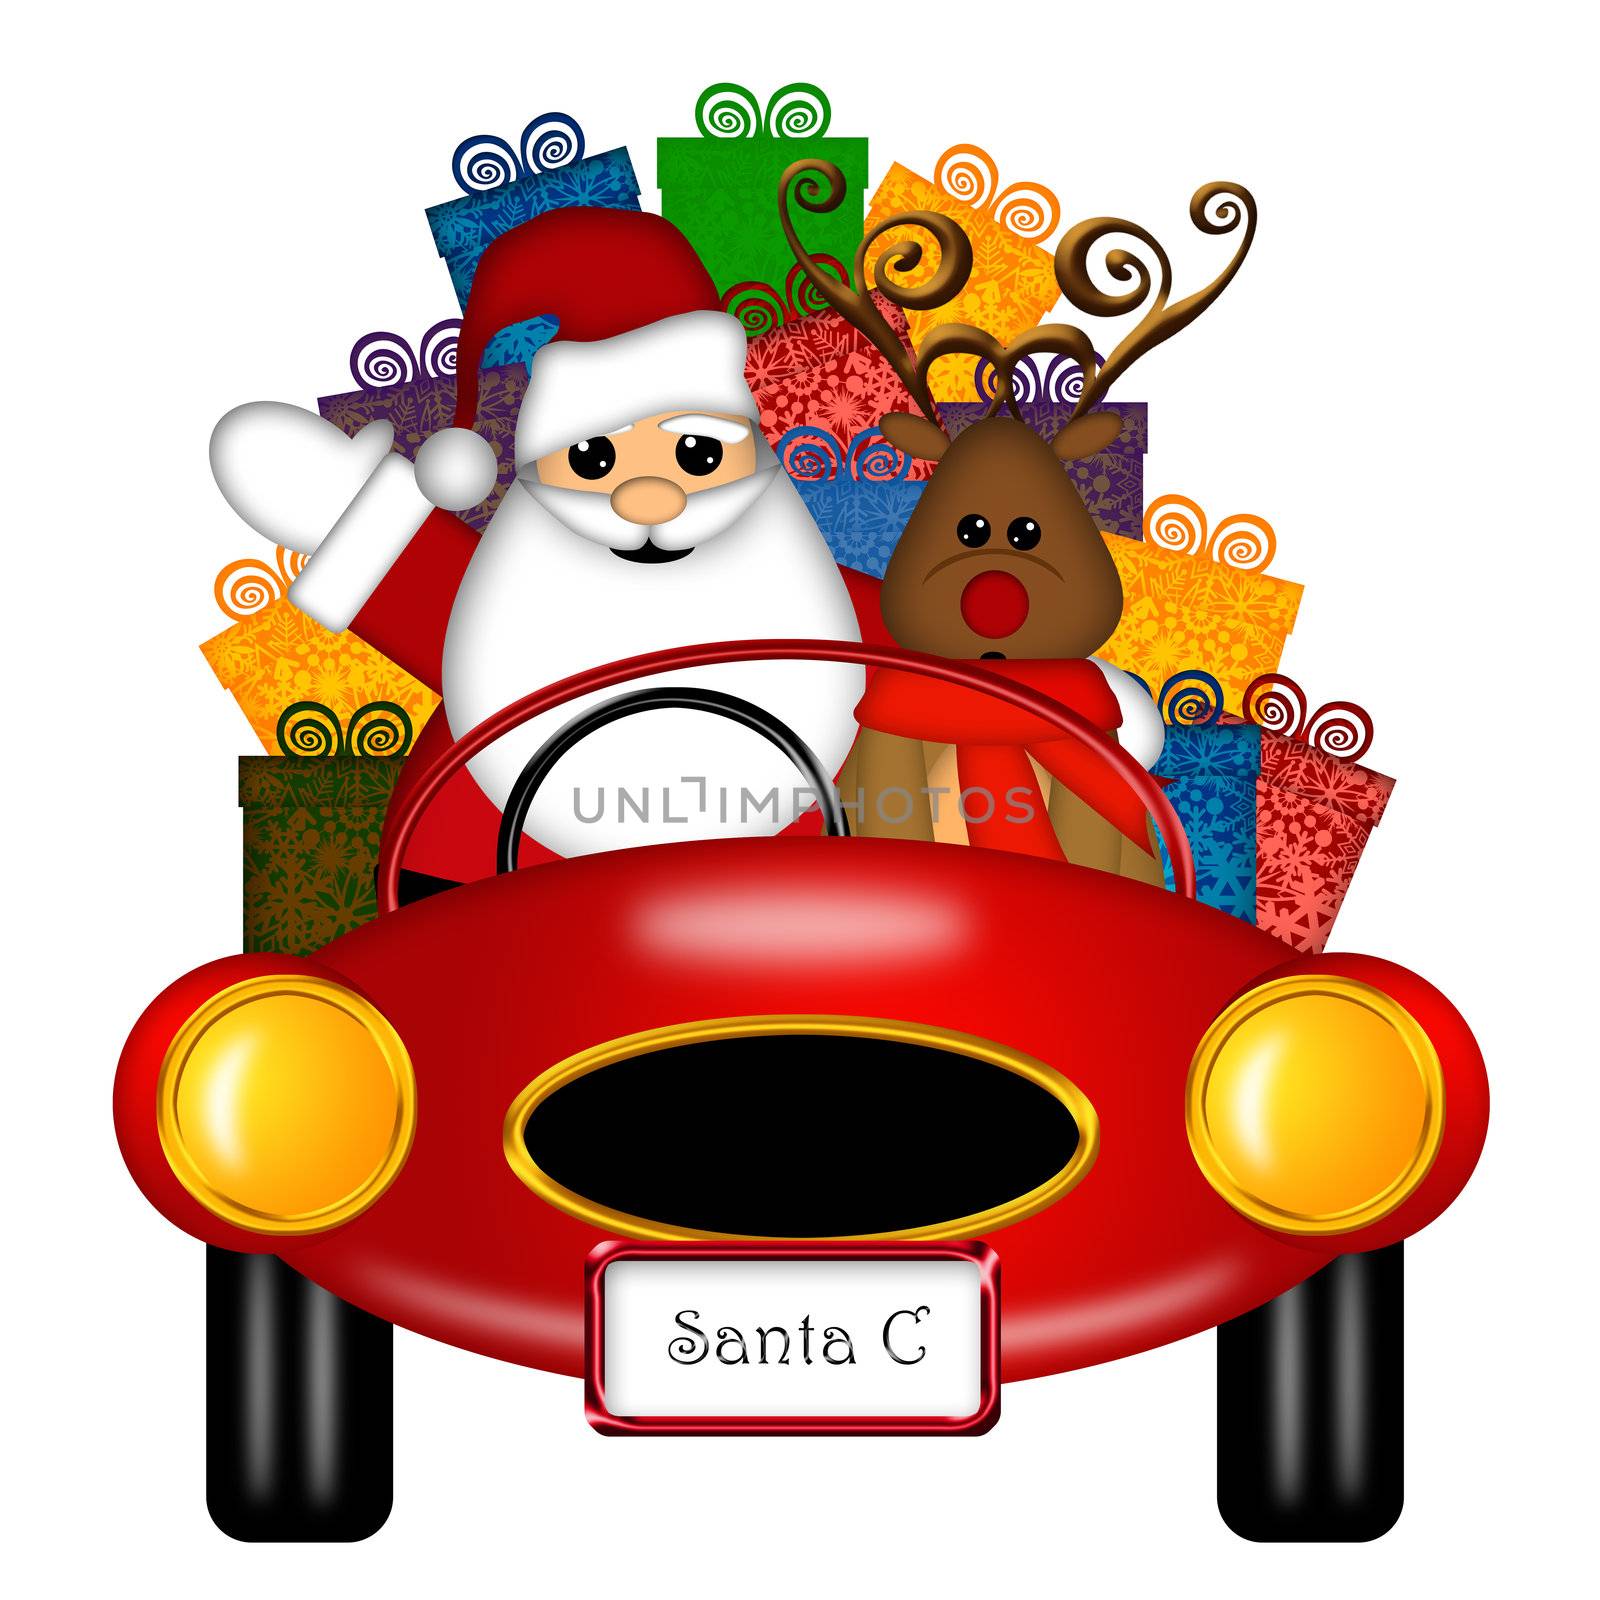 Santa Claus and Reindeer in Red Sports Car Delivering Presents Isolated on White Illustration